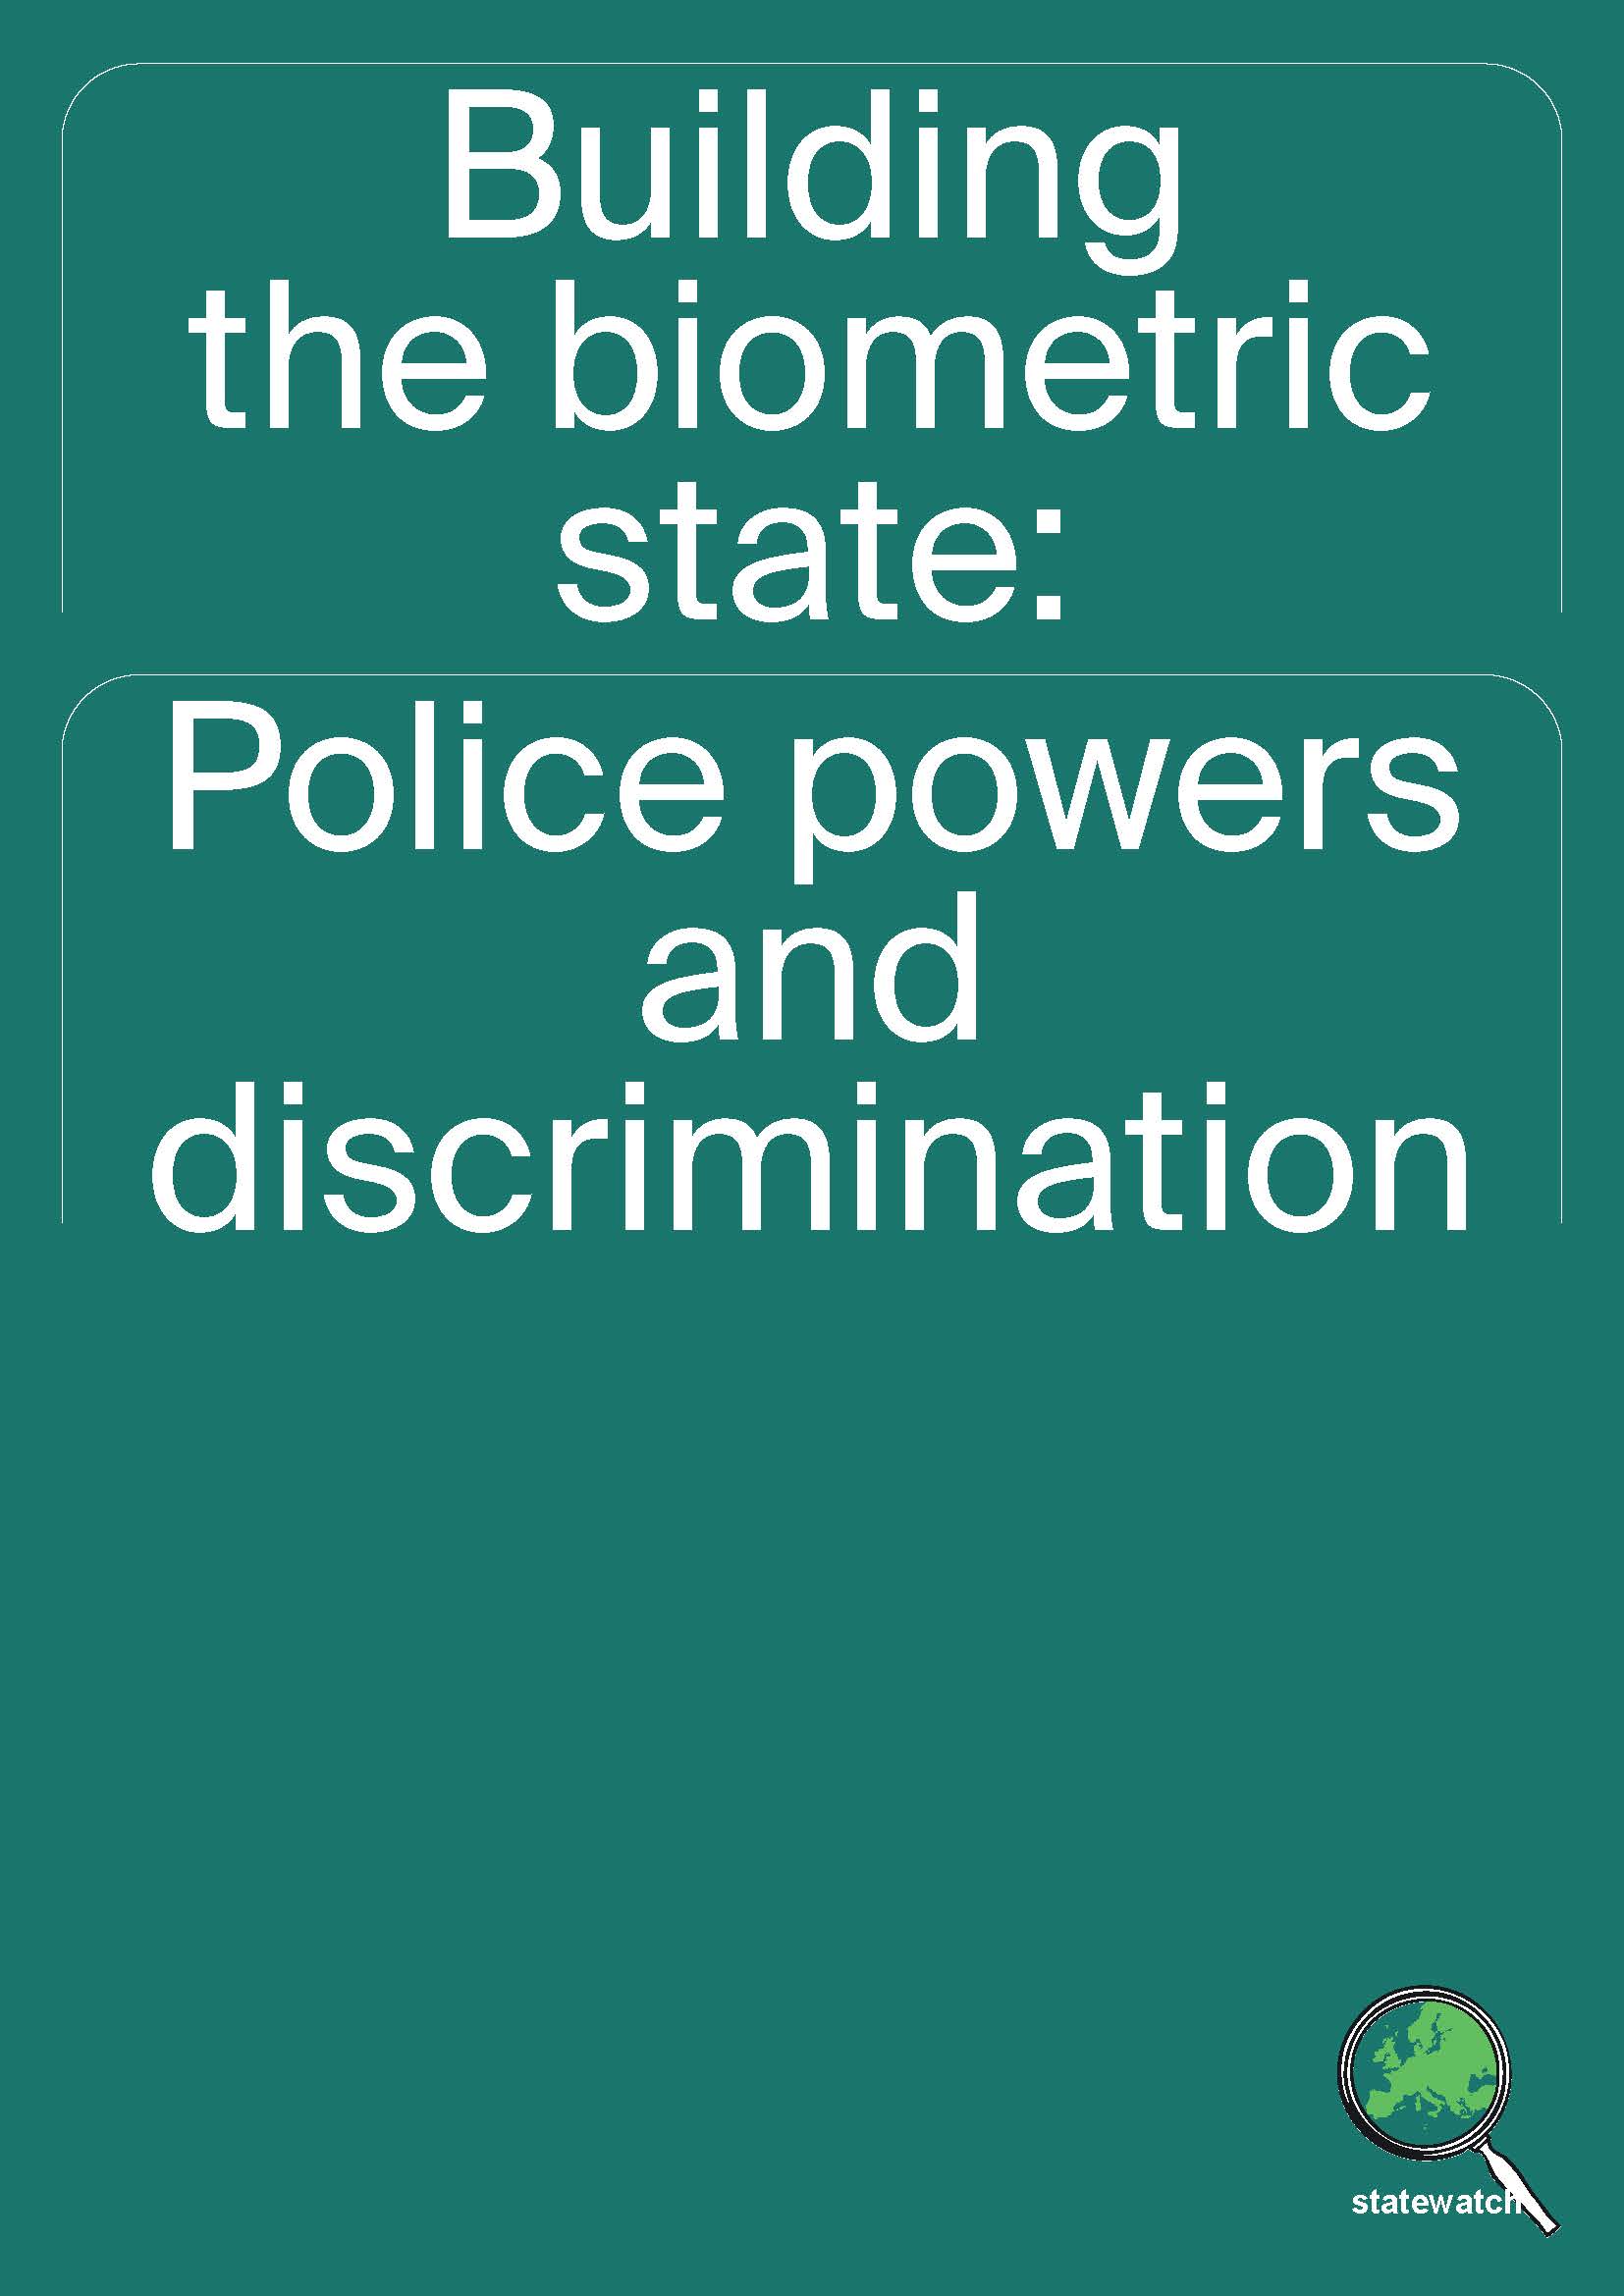 [Report] Building the biometric state: Police powers and discrimination